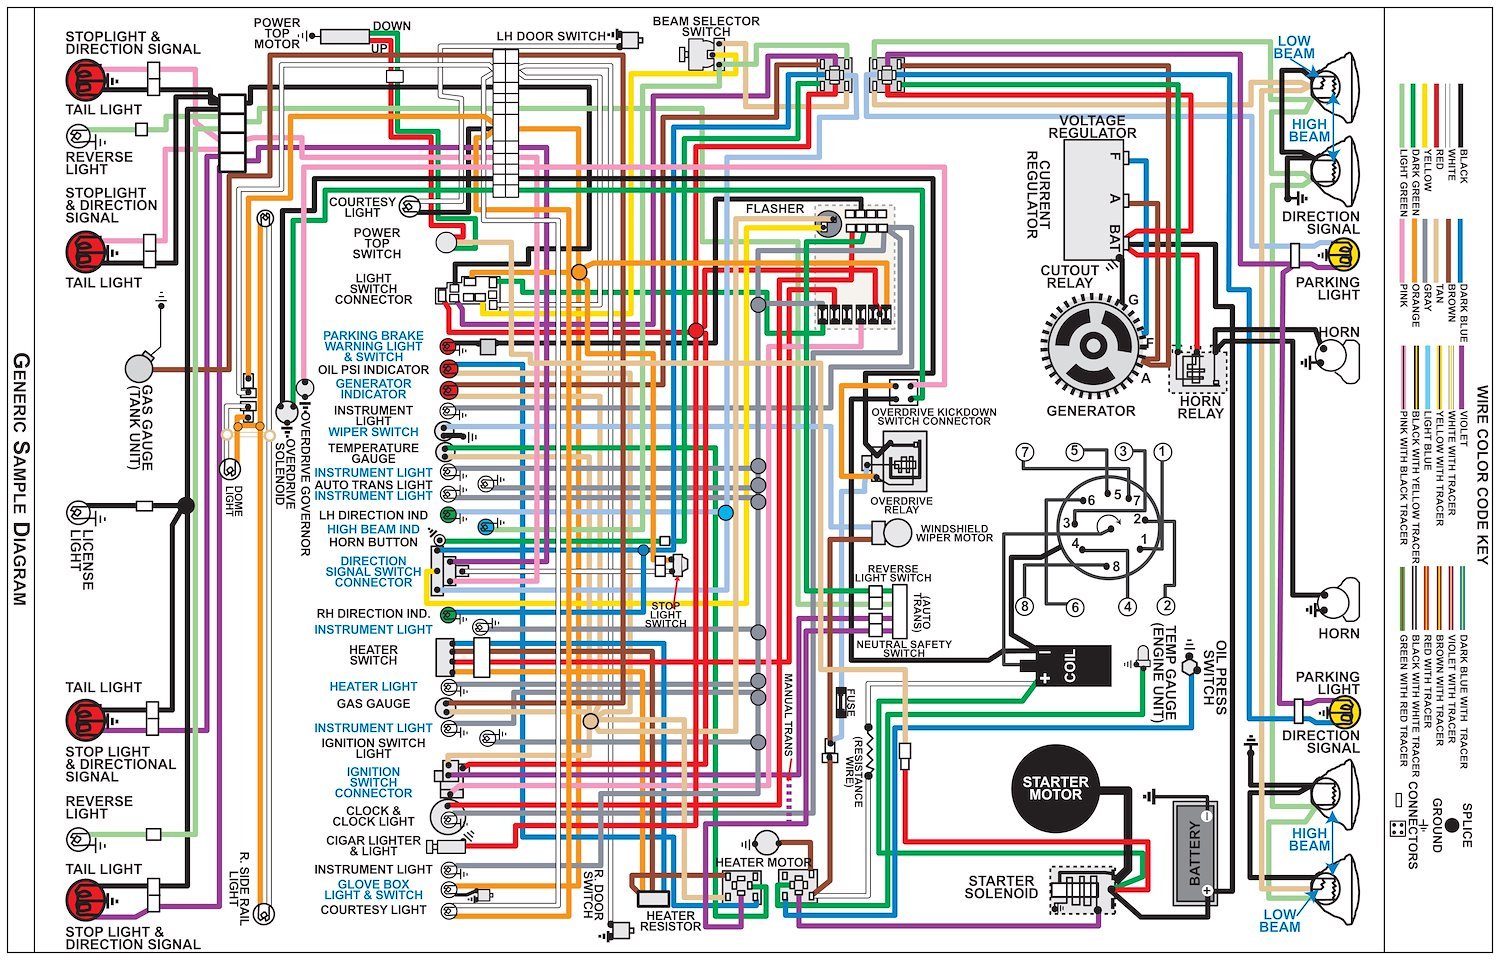 Wiring Diagram for 1970 Plymouth Barracuda with HEMI Engine, 11 in x 17 in., Laminated